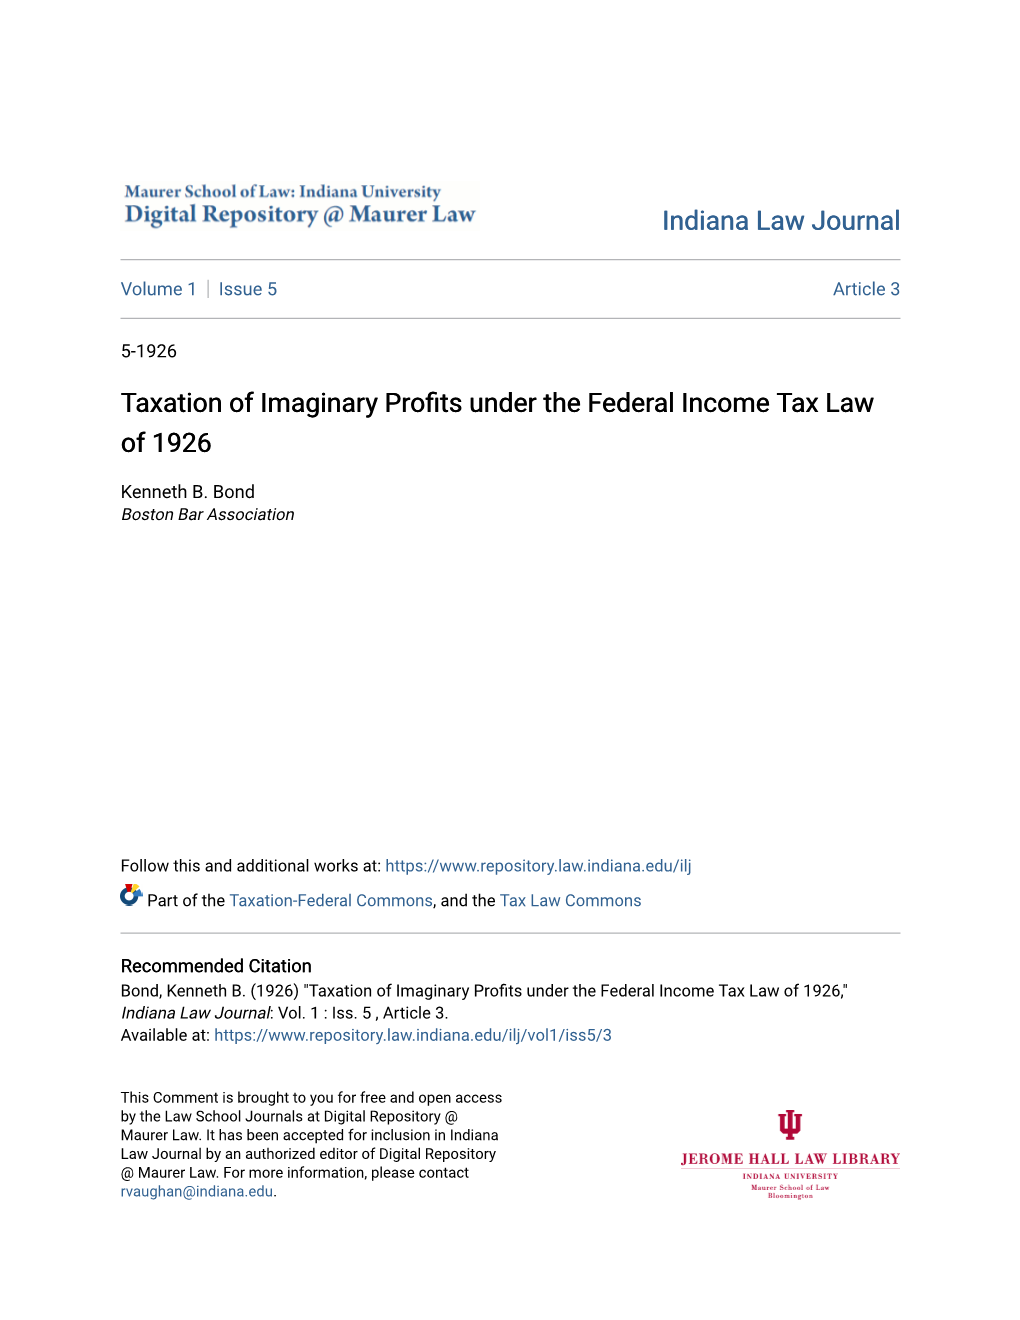 Taxation of Imaginary Profits Under the Federal Income Tax Law of 1926